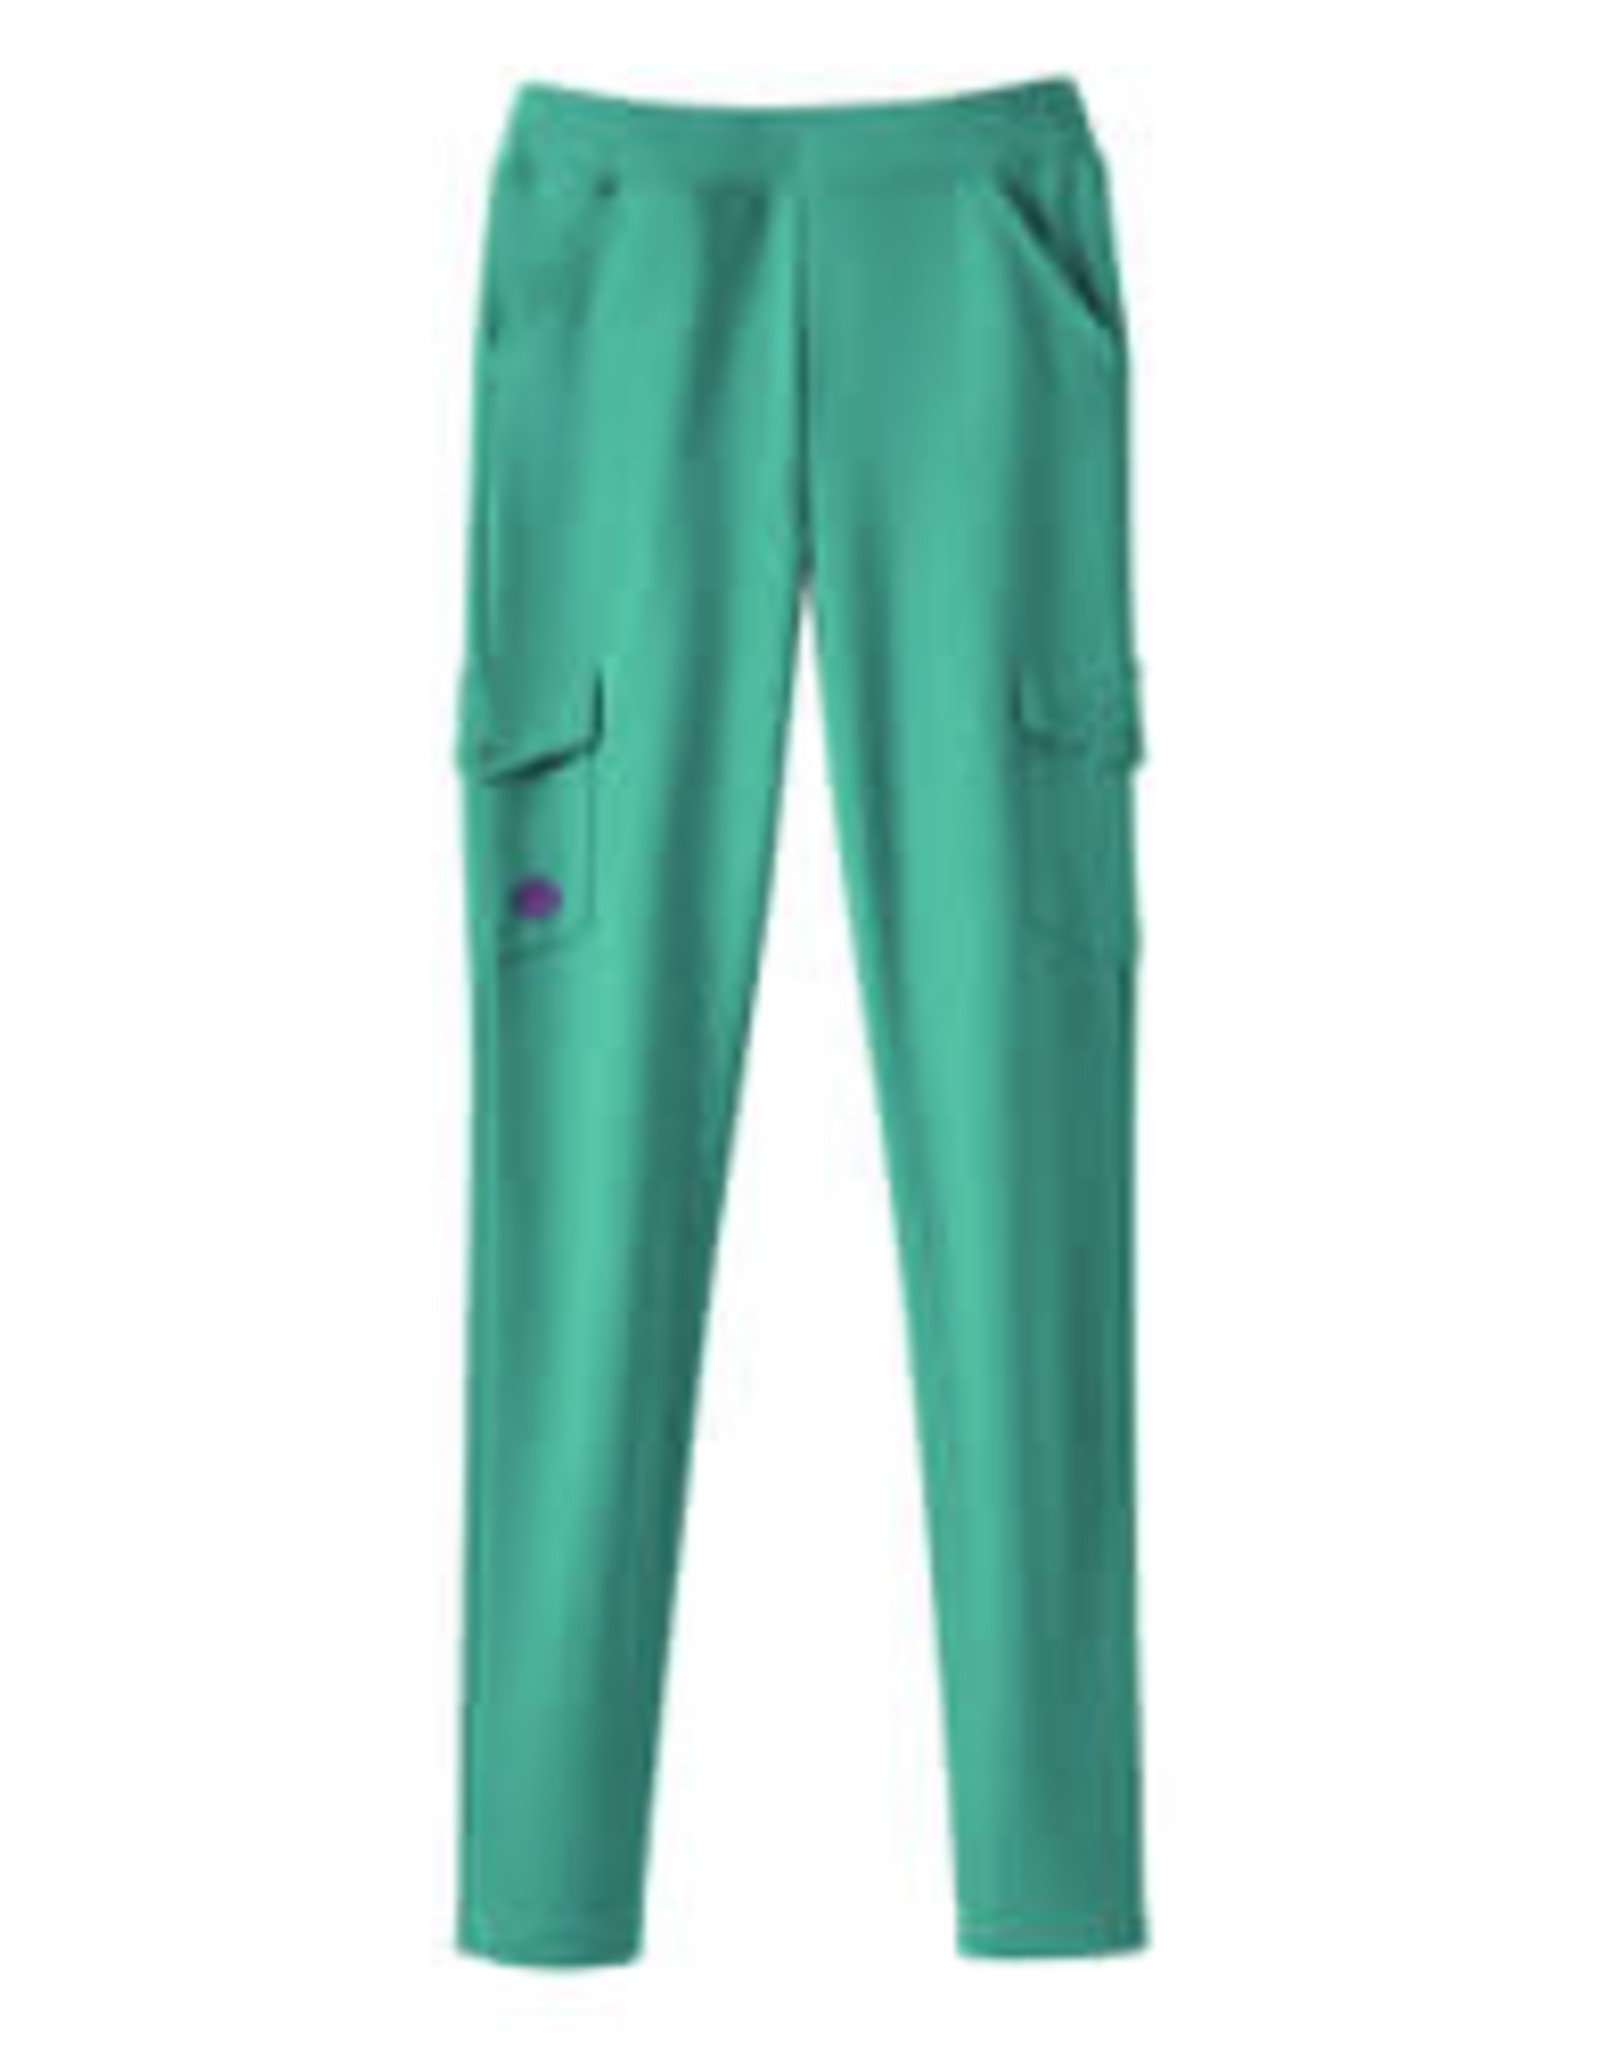 GIRL SCOUTS OF THE USA Junior Cargo Slim Knit Pants